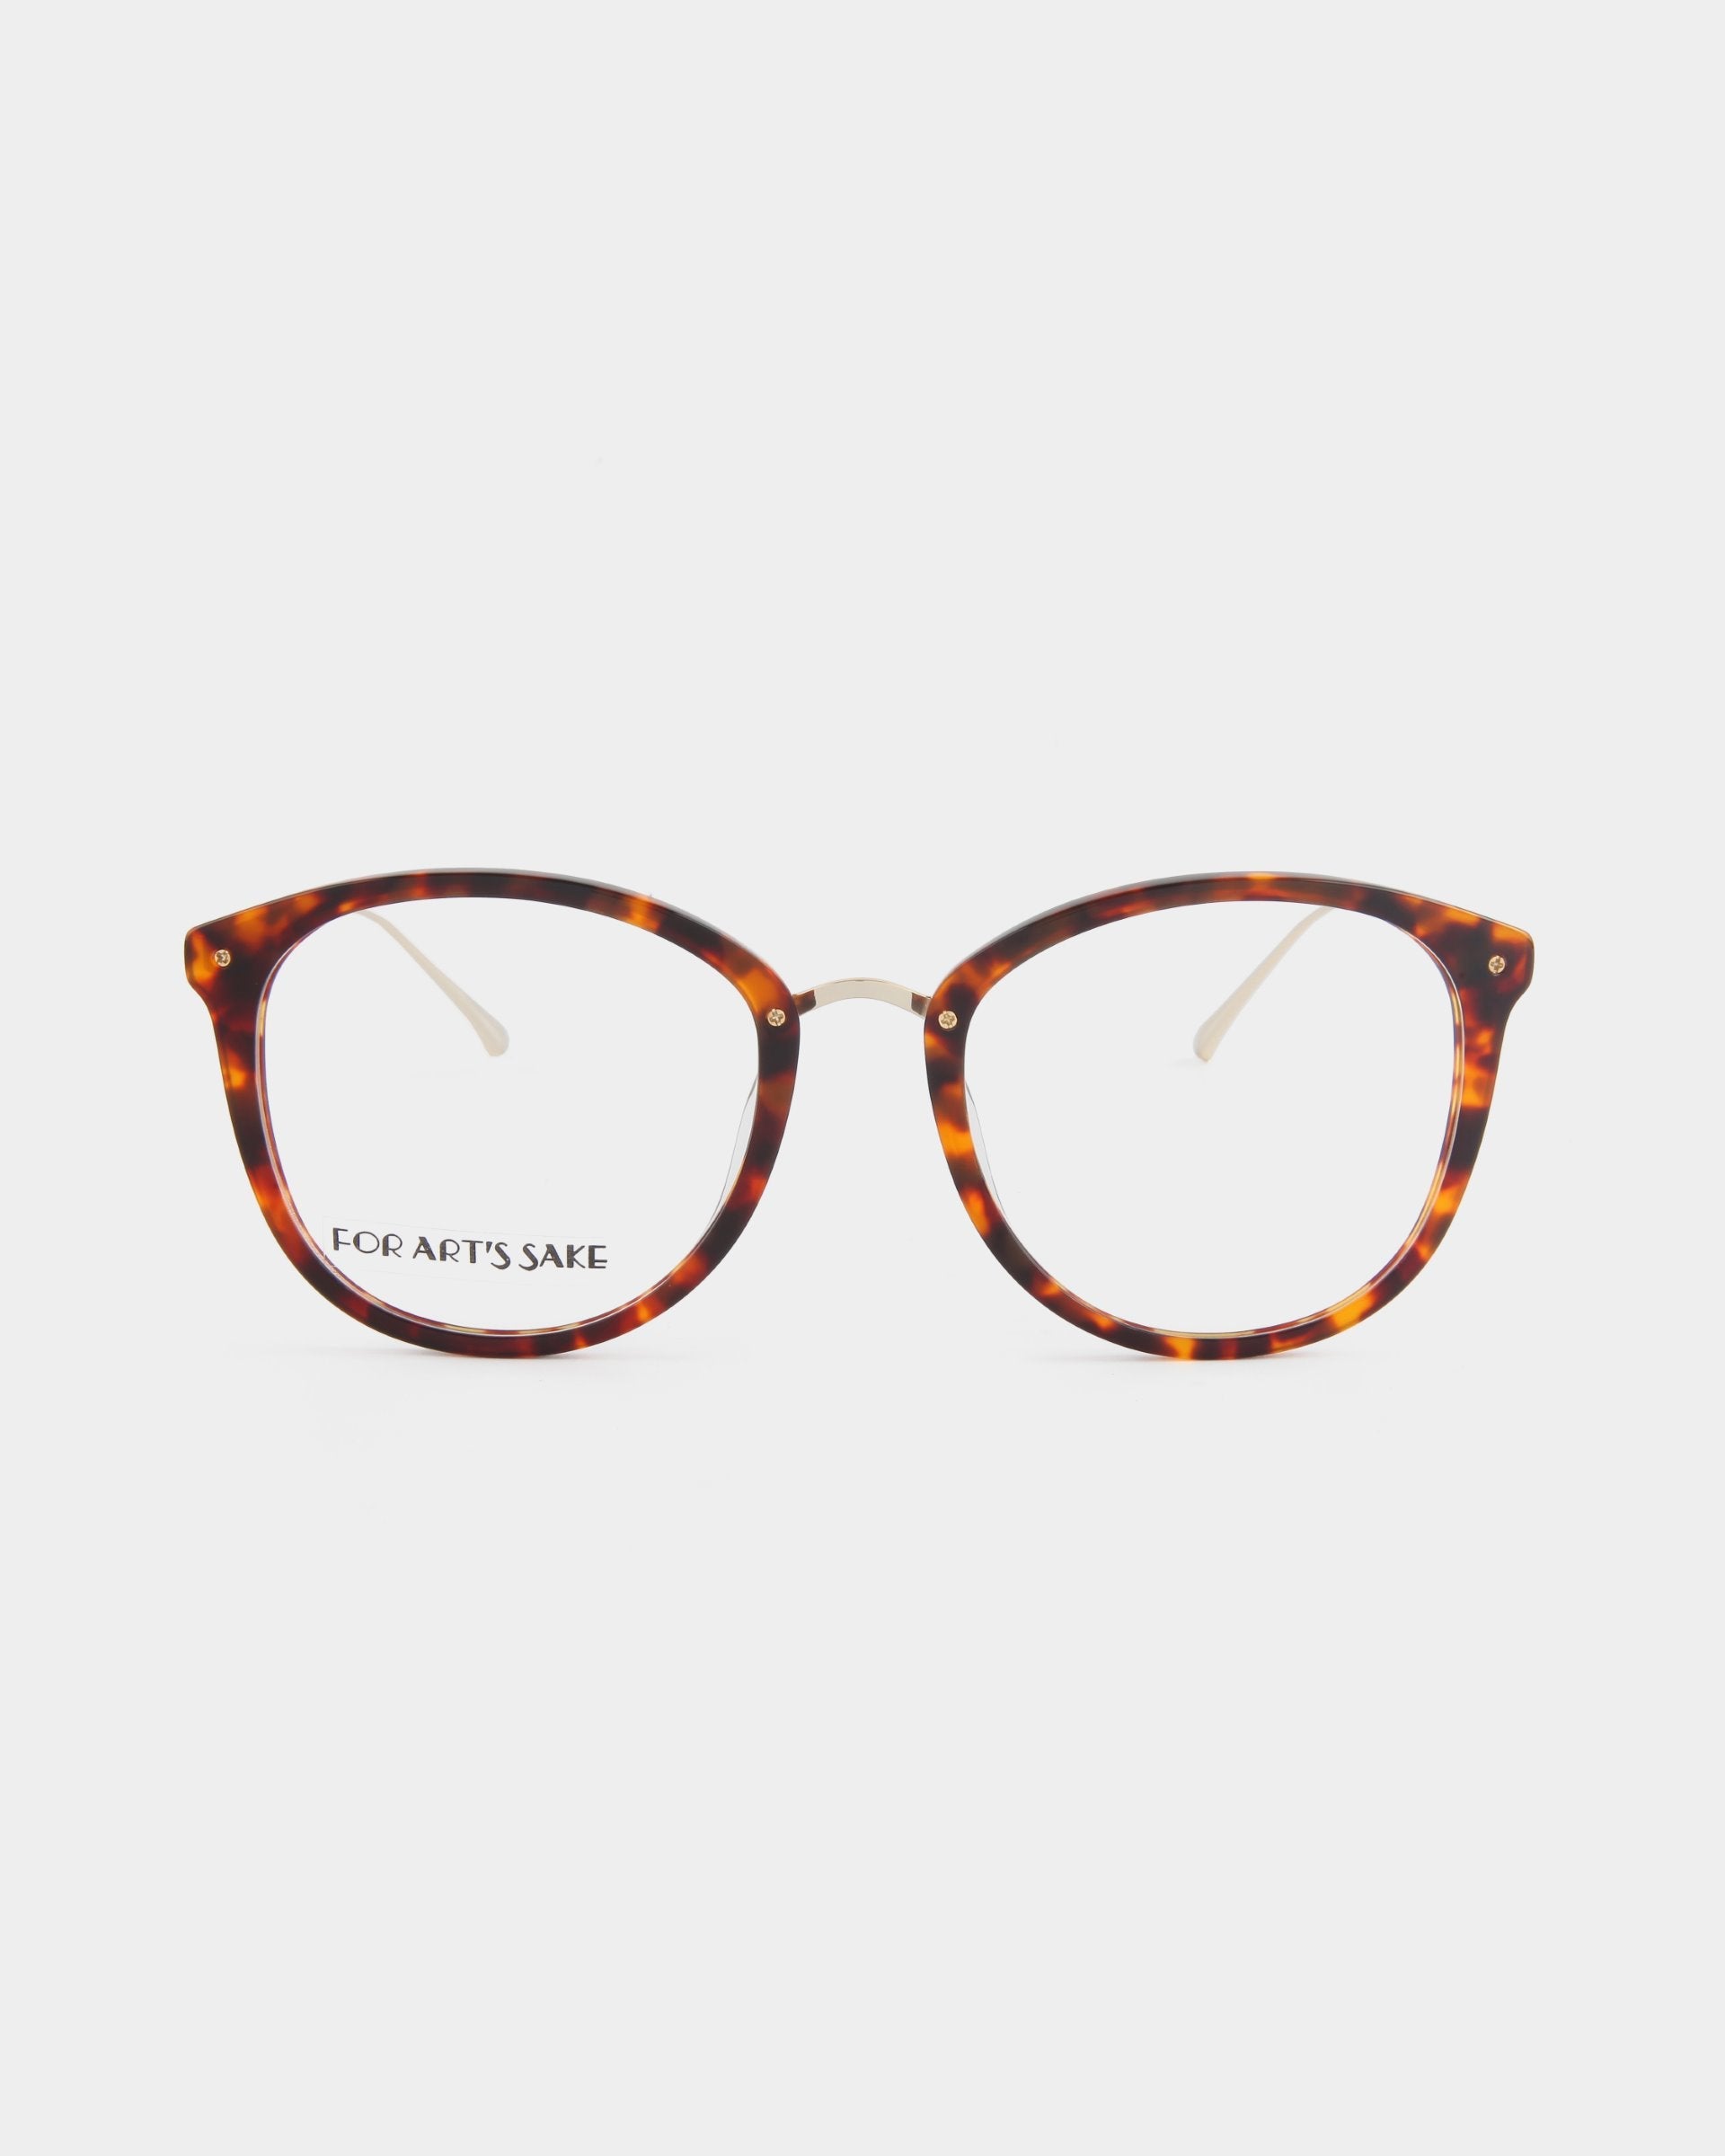 A pair of eyeglasses with round tortoiseshell frames and clear lenses is shown against a white background. The brand's name, "For Art's Sake®," is visible on the inside of the left arm, highlighting their premium opticals which also come with an optional blue light filter for added protection.